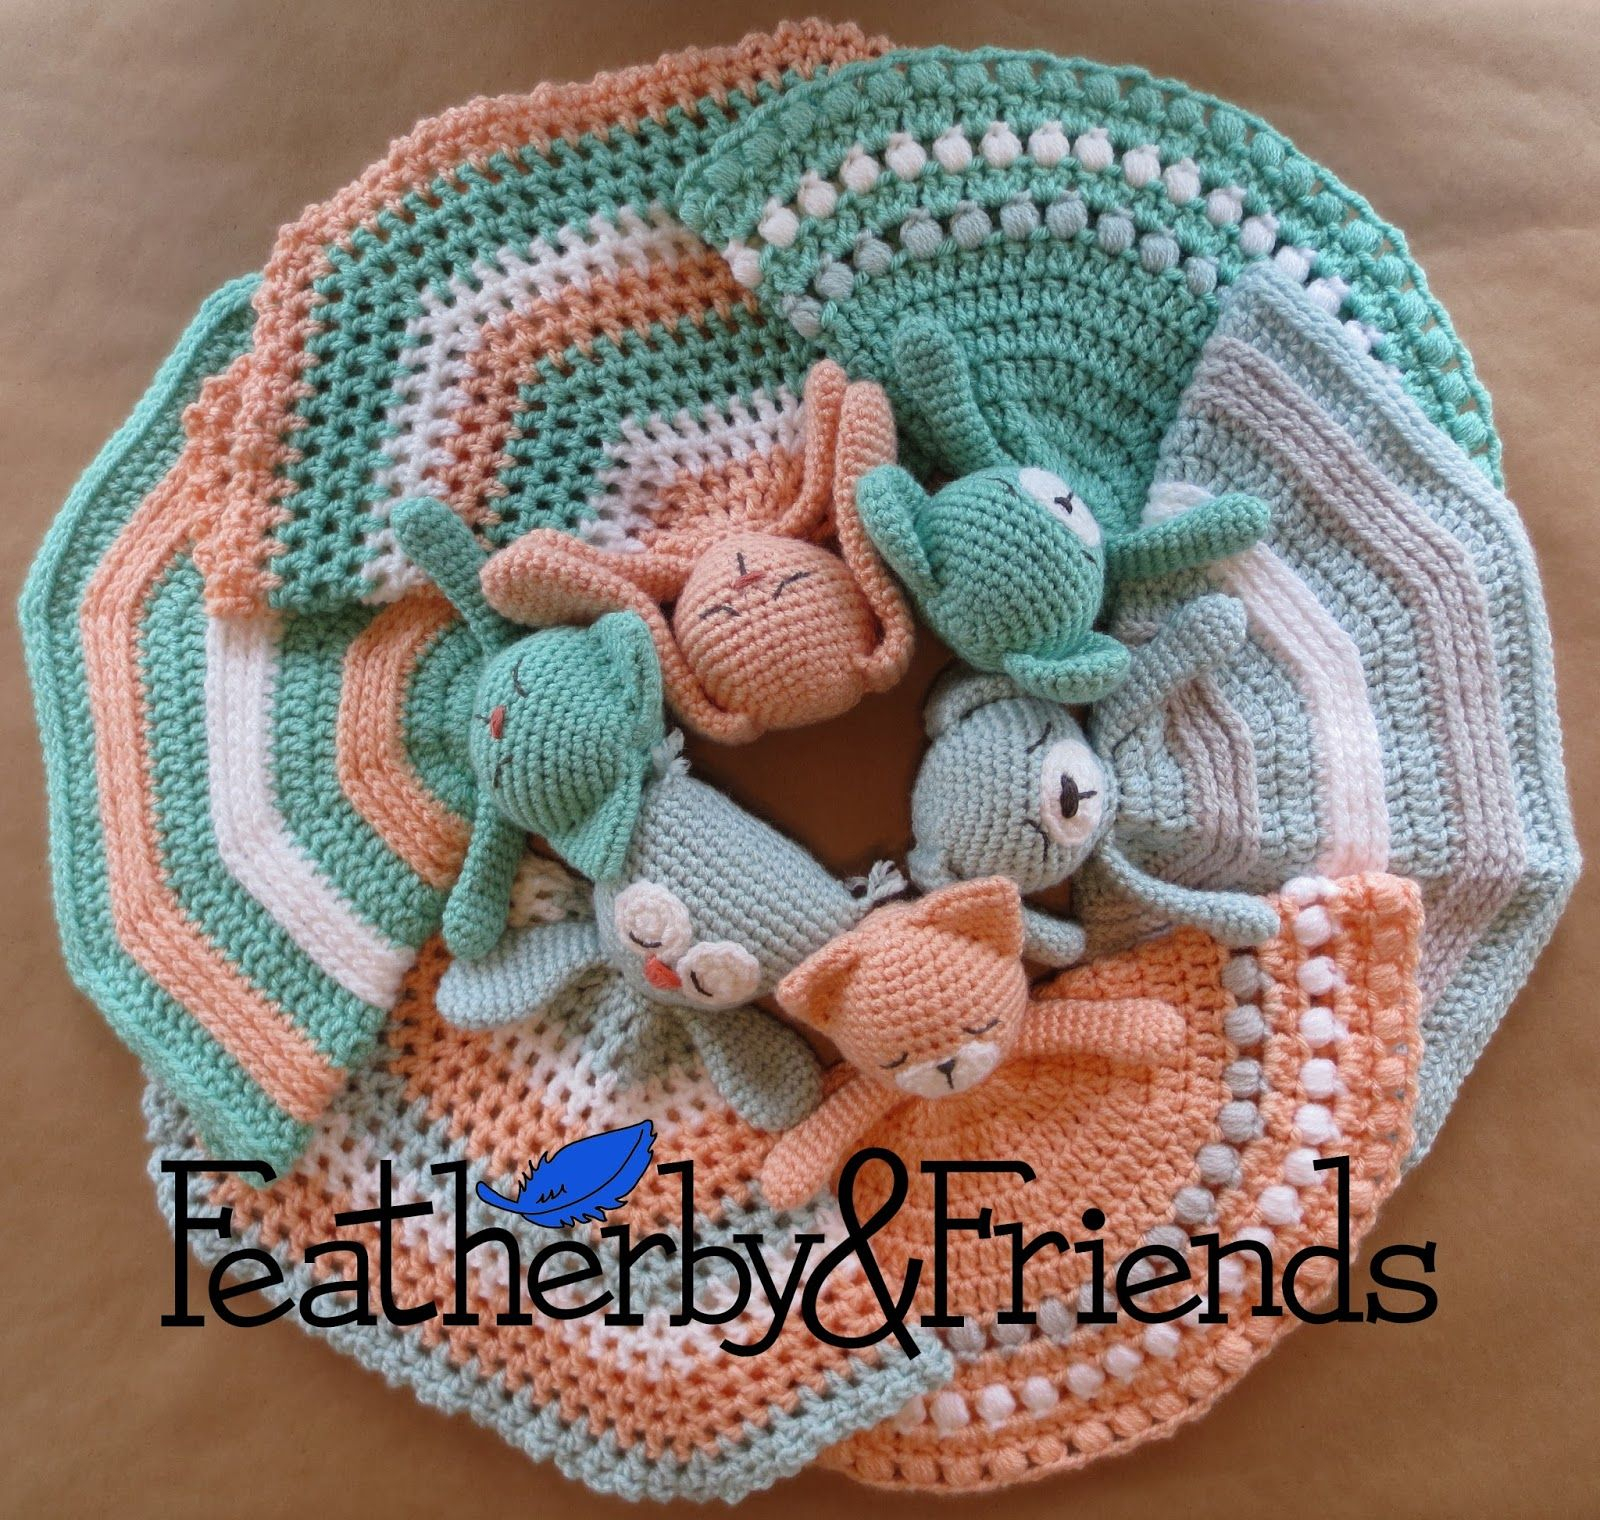 Free Crochet Lovey Pattern Mix Match Lovies A Lovey Pattern That Includes Options For 6